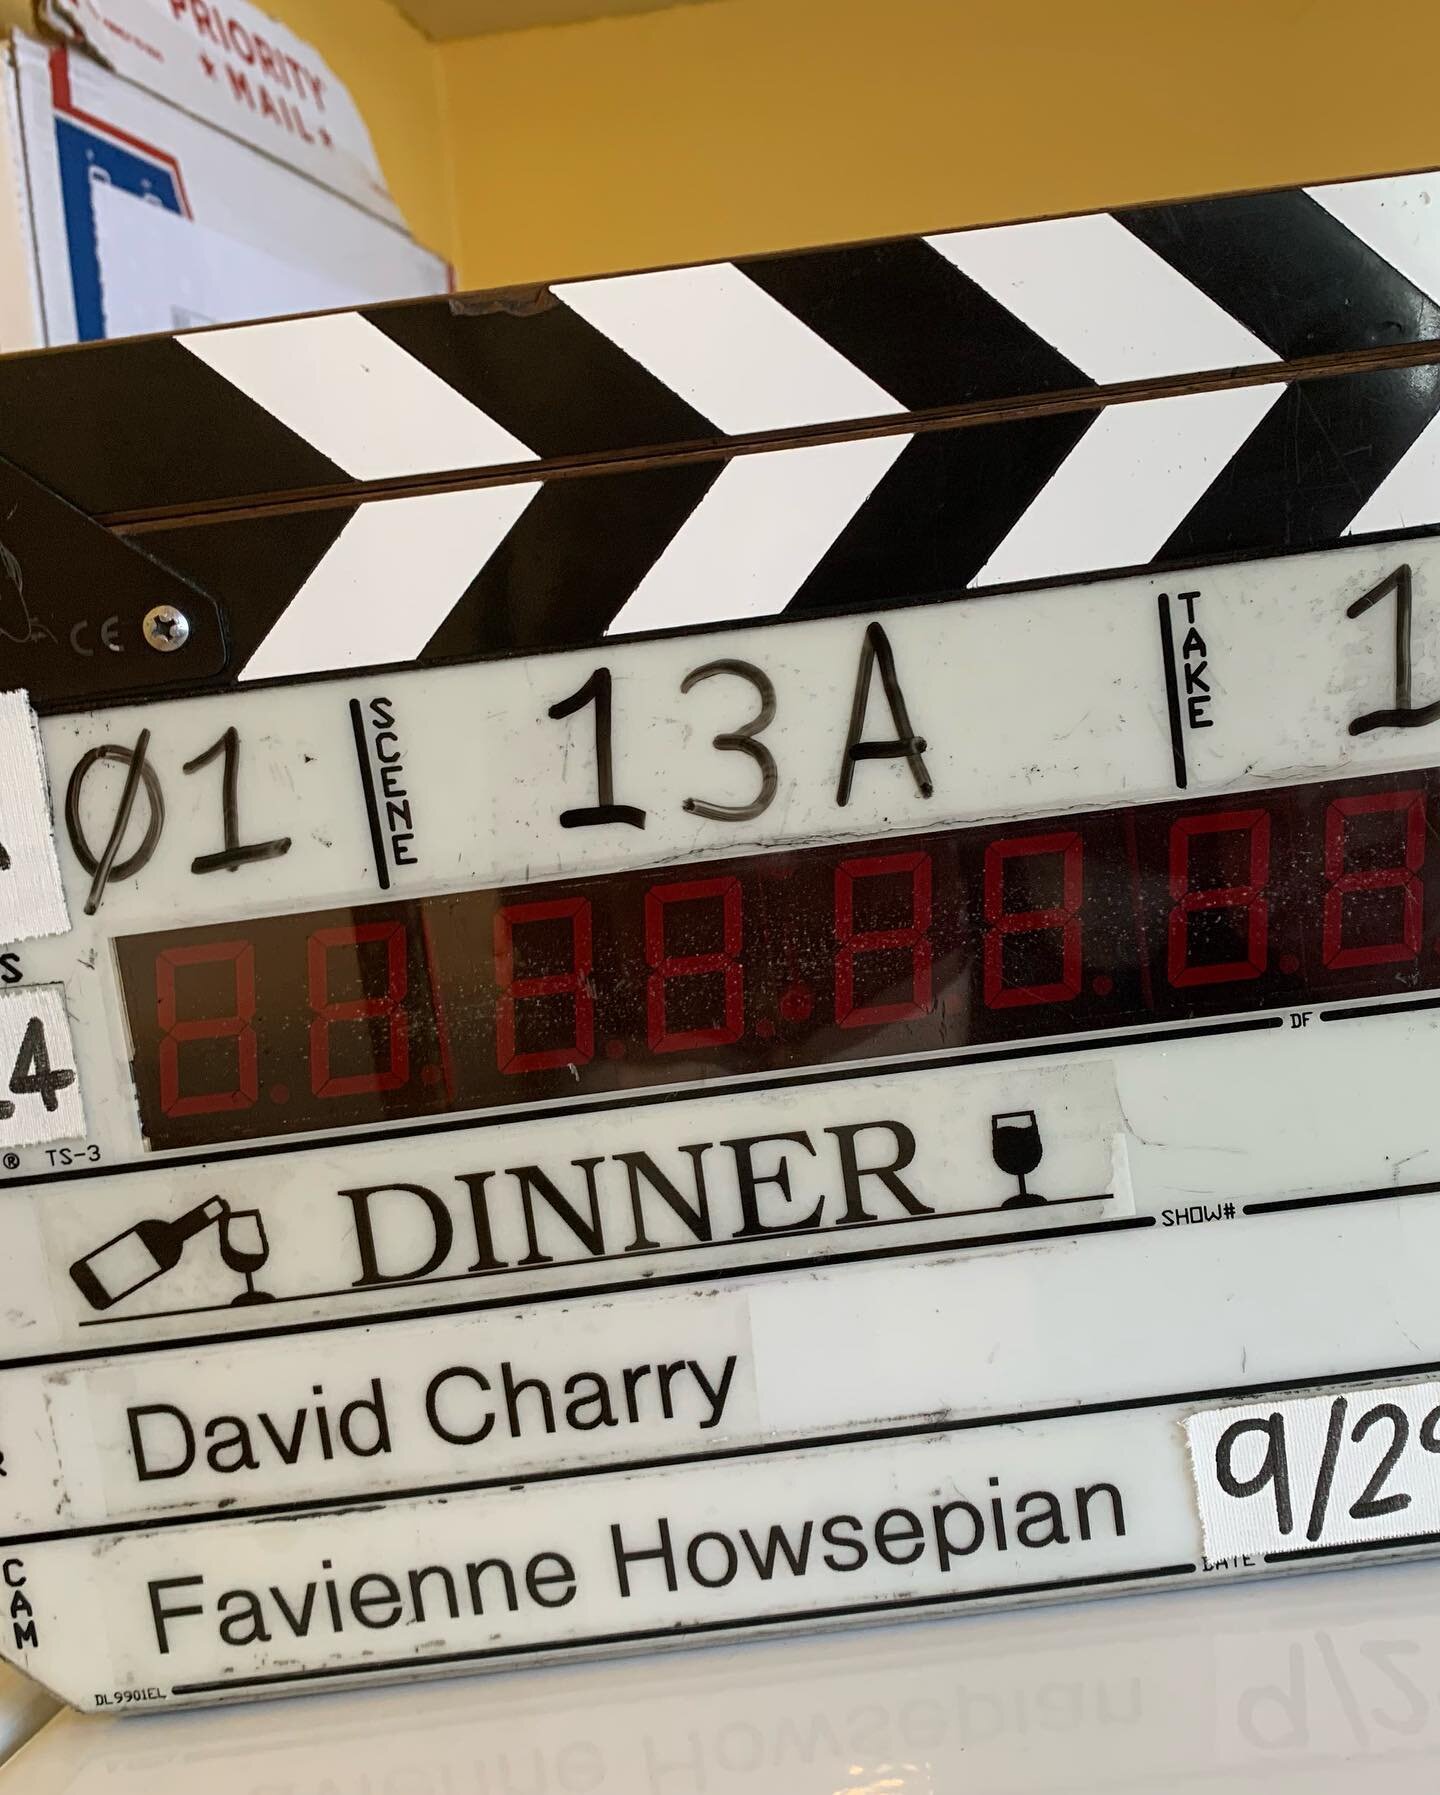 Thank you @spanishmossprod for an incredible #sagapproved shoot this weekend! Couldn&rsquo;t have asked for better people to work with on @dinner.film. The entire cast and crew were class acts and I&rsquo;m pinching myself that I got to be part of it